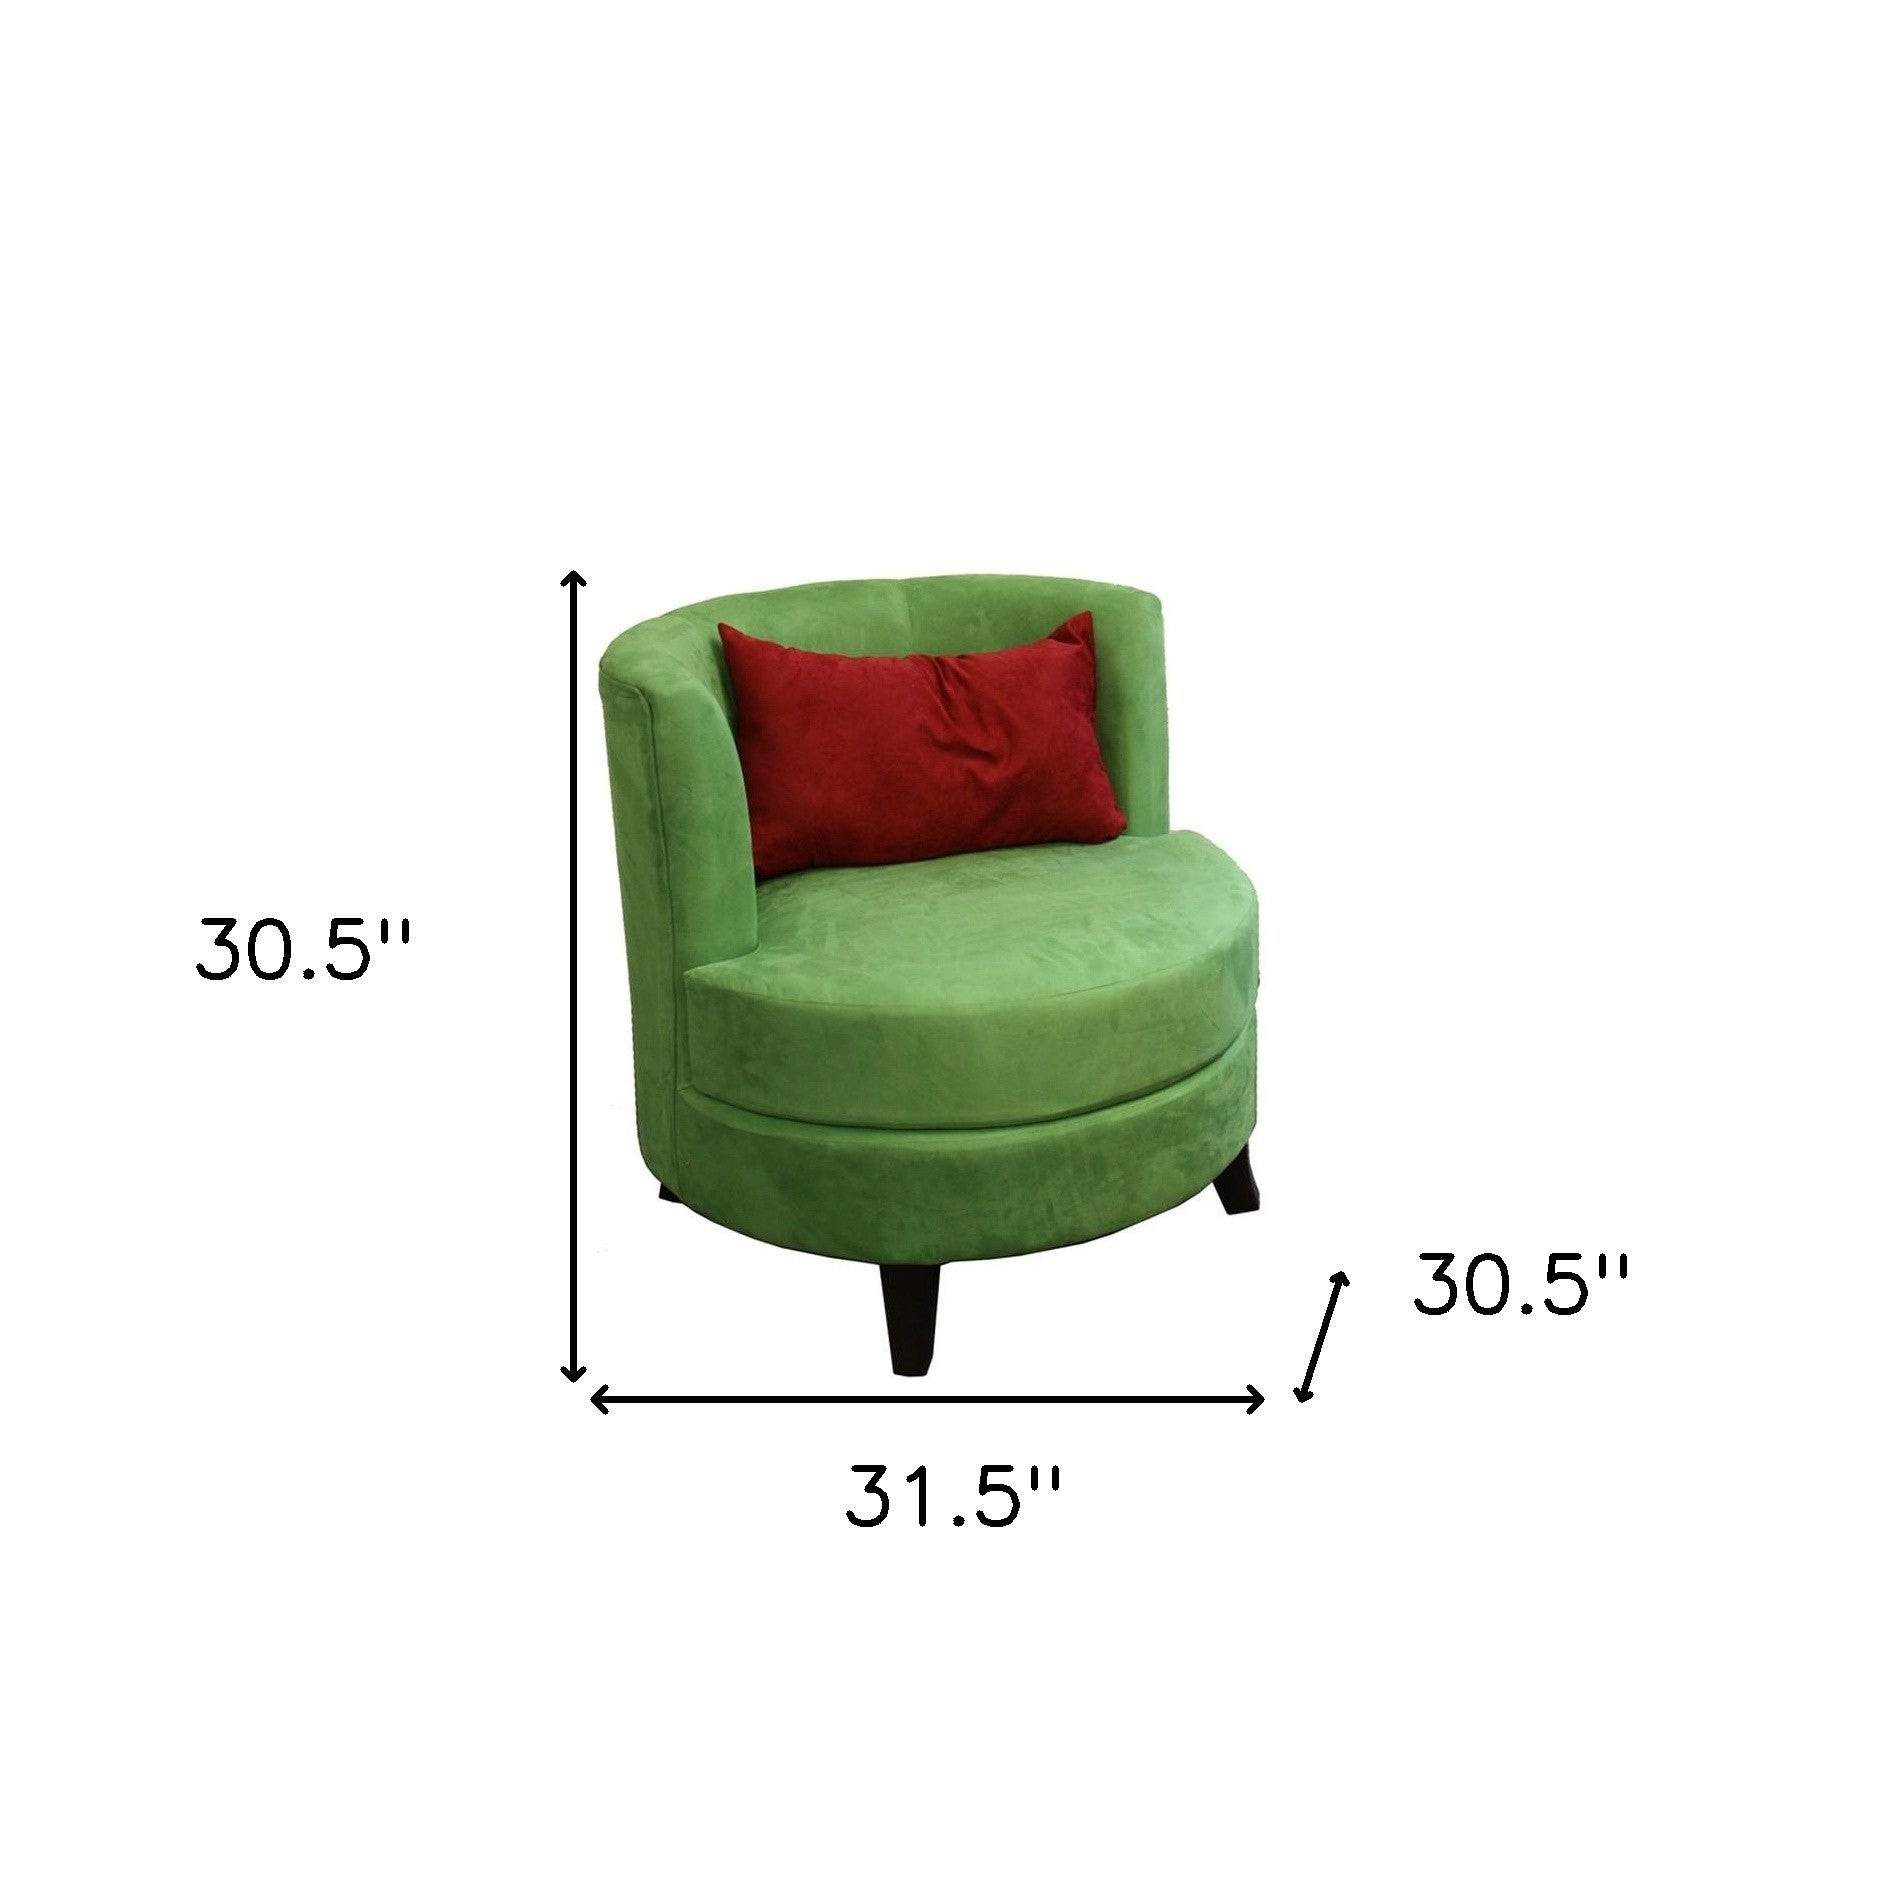 31" Green Microfiber Retro Round Accent Chair with Contrast Pillow